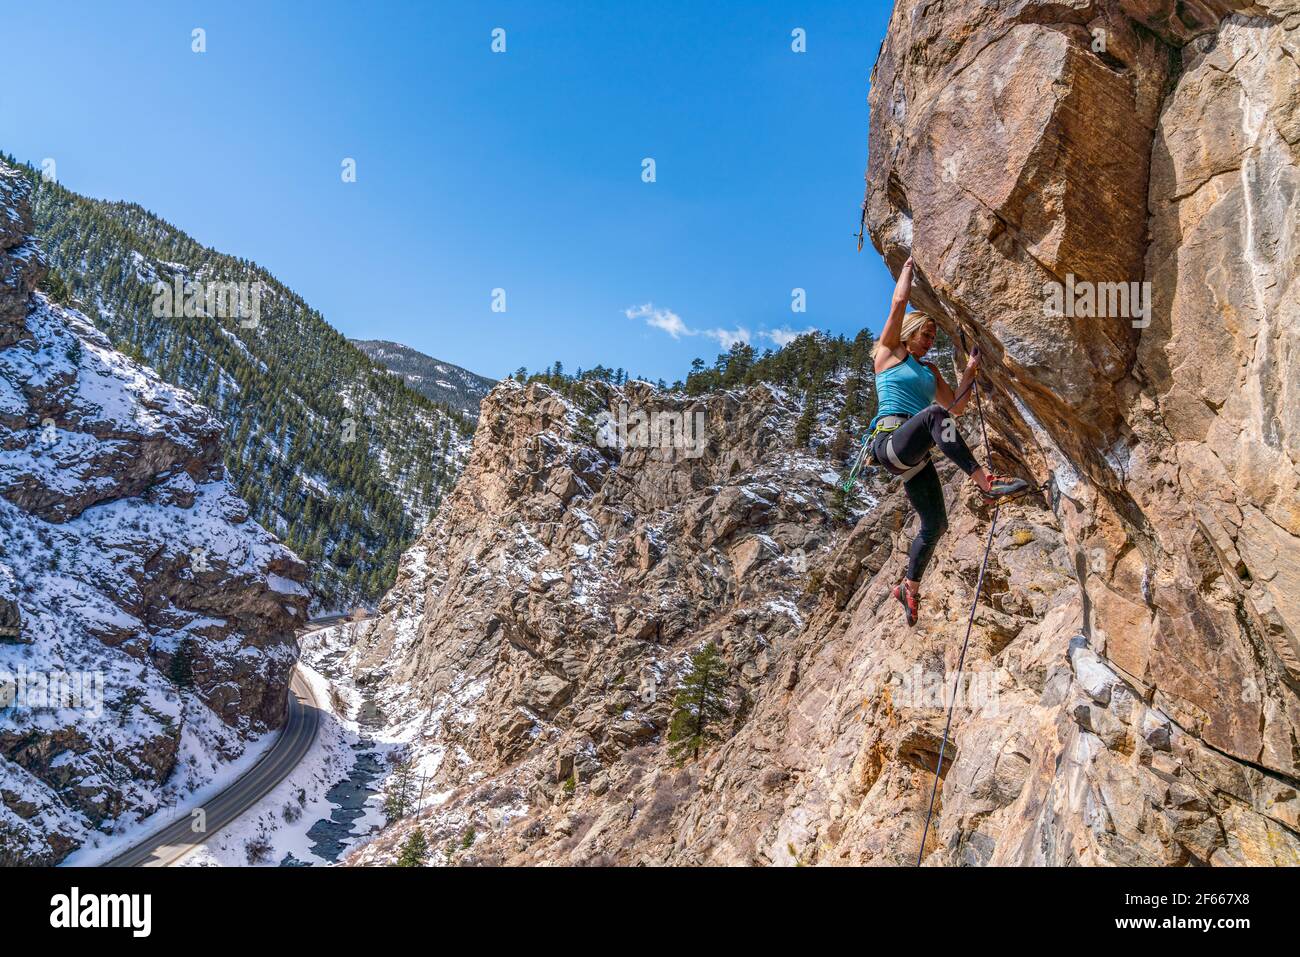 3/27/21 Golden, Colorado - A woman works out the moves on a steep rock climb in Clear Creek Canyon. Stock Photo